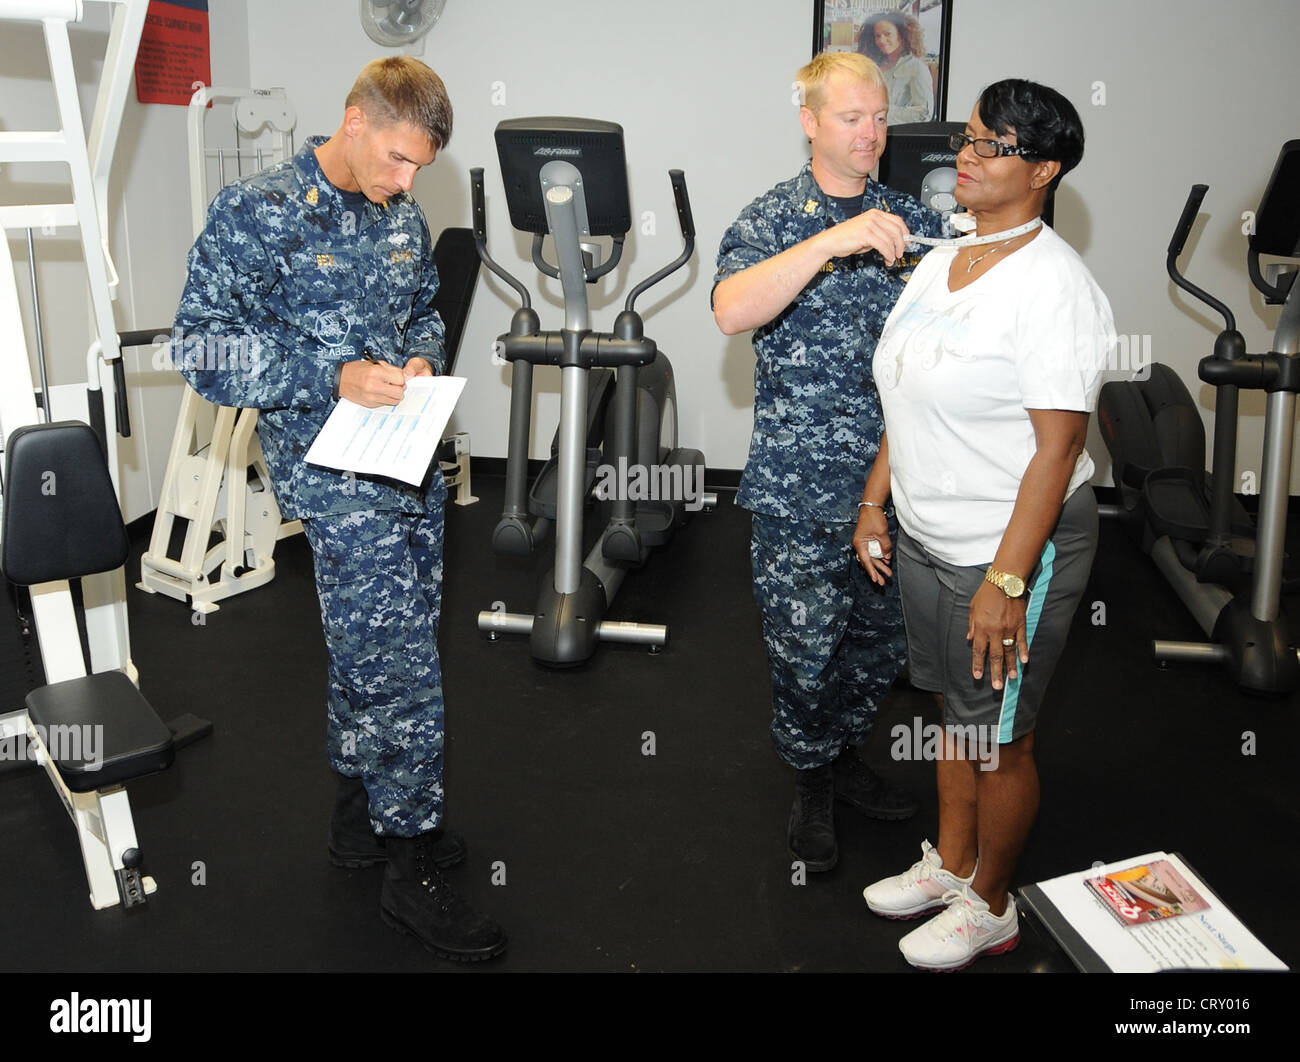 Patricia Richmond, a financial management analyst for Navy Personnel Command, is measured as part of an initial fitness assessment for the Federal Executive Association Fitness Challenge. The goals of the competition are to have fun, be safe, learn about healthy eating, start exercising and lose weight. Stock Photo